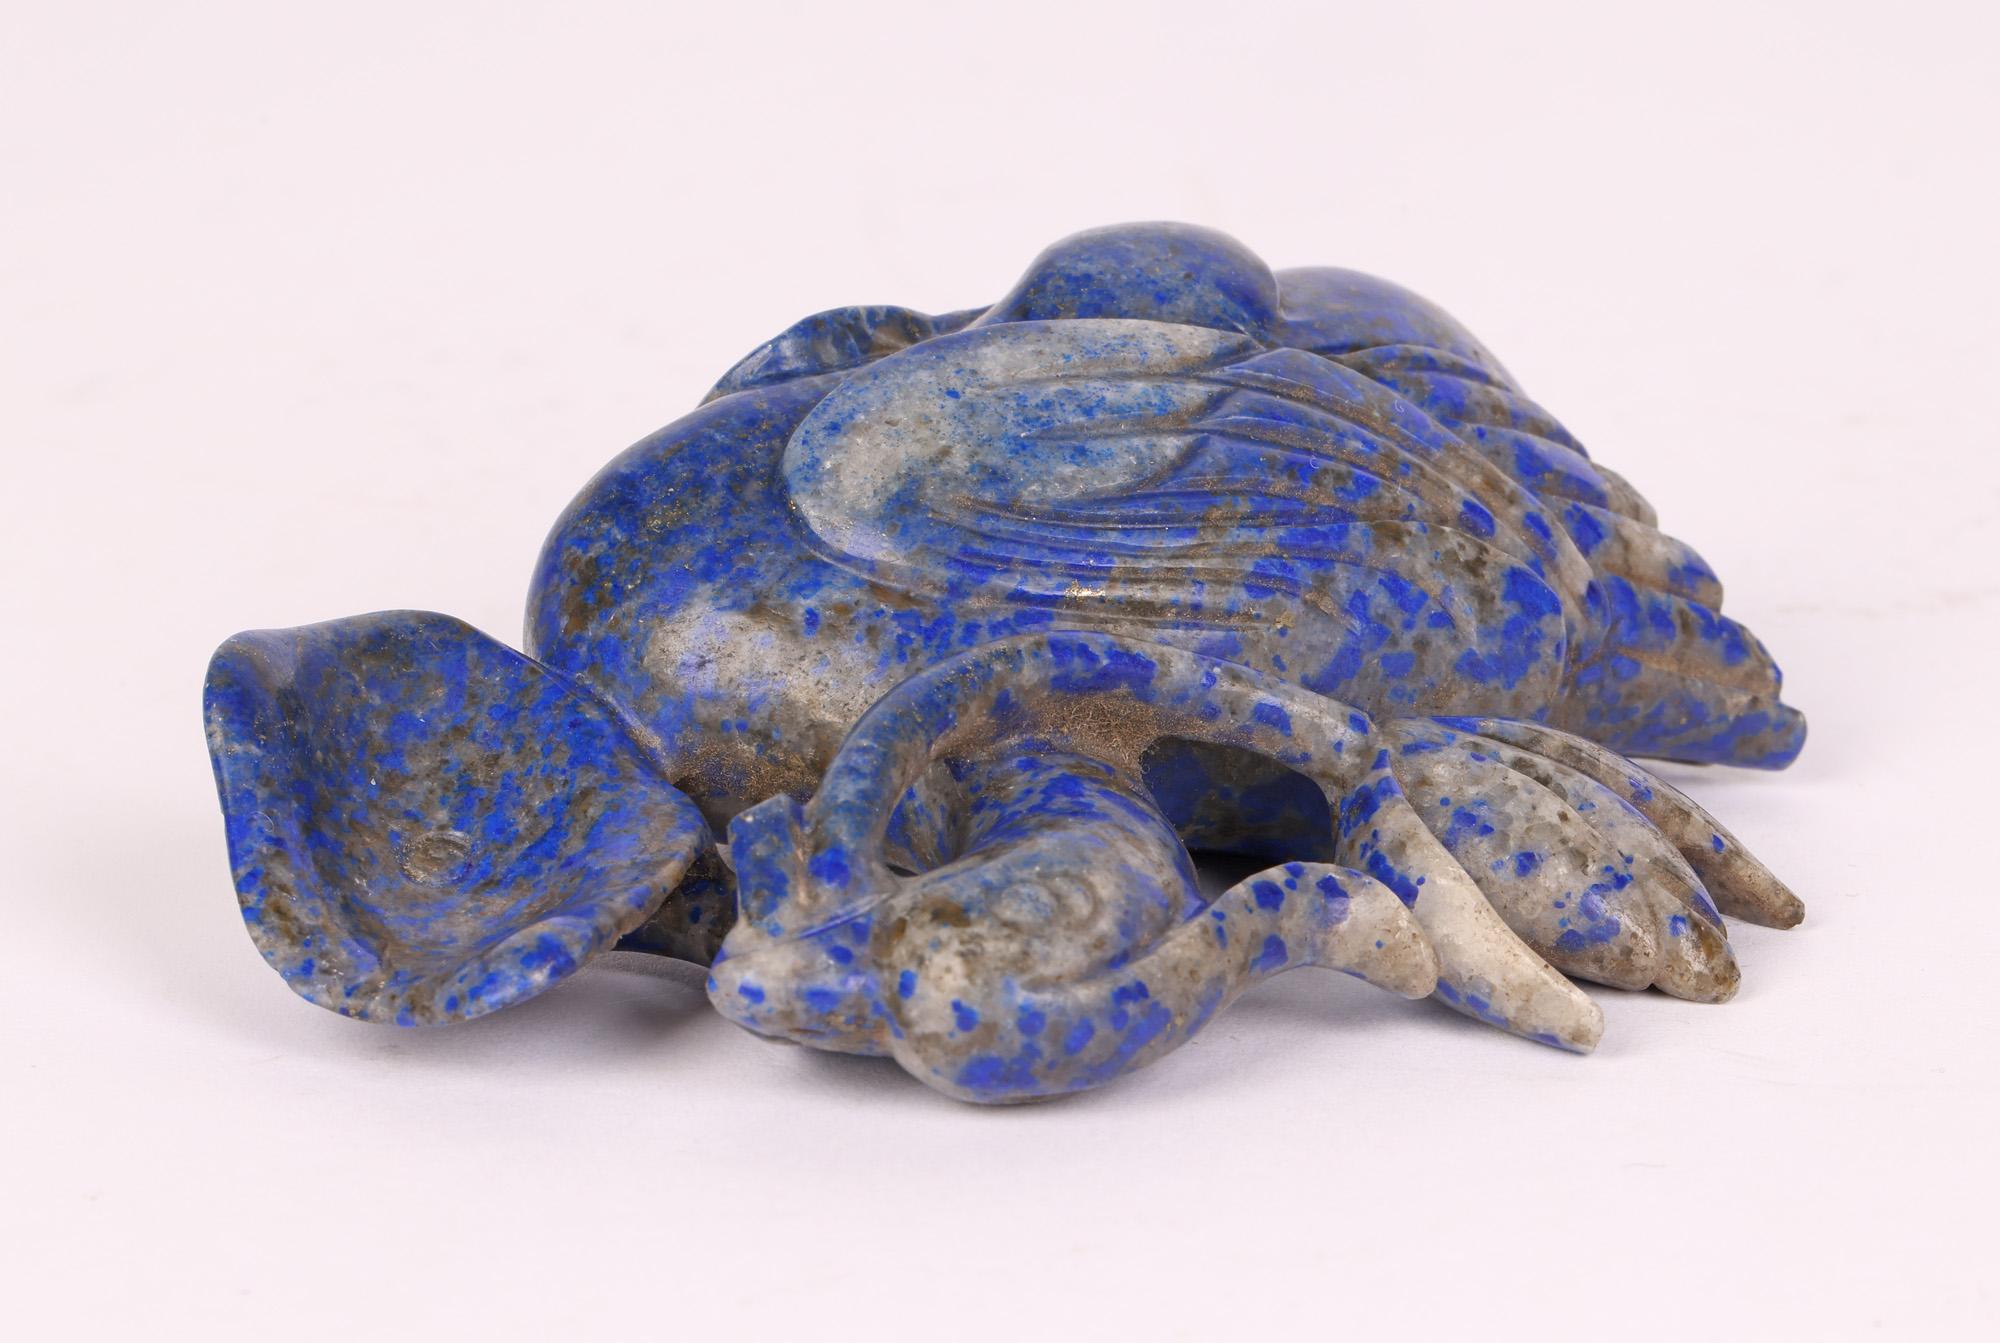 Chinese Carved Lapis Lazuli Duck and Lotus Flower Figure   In Good Condition For Sale In Bishop's Stortford, Hertfordshire